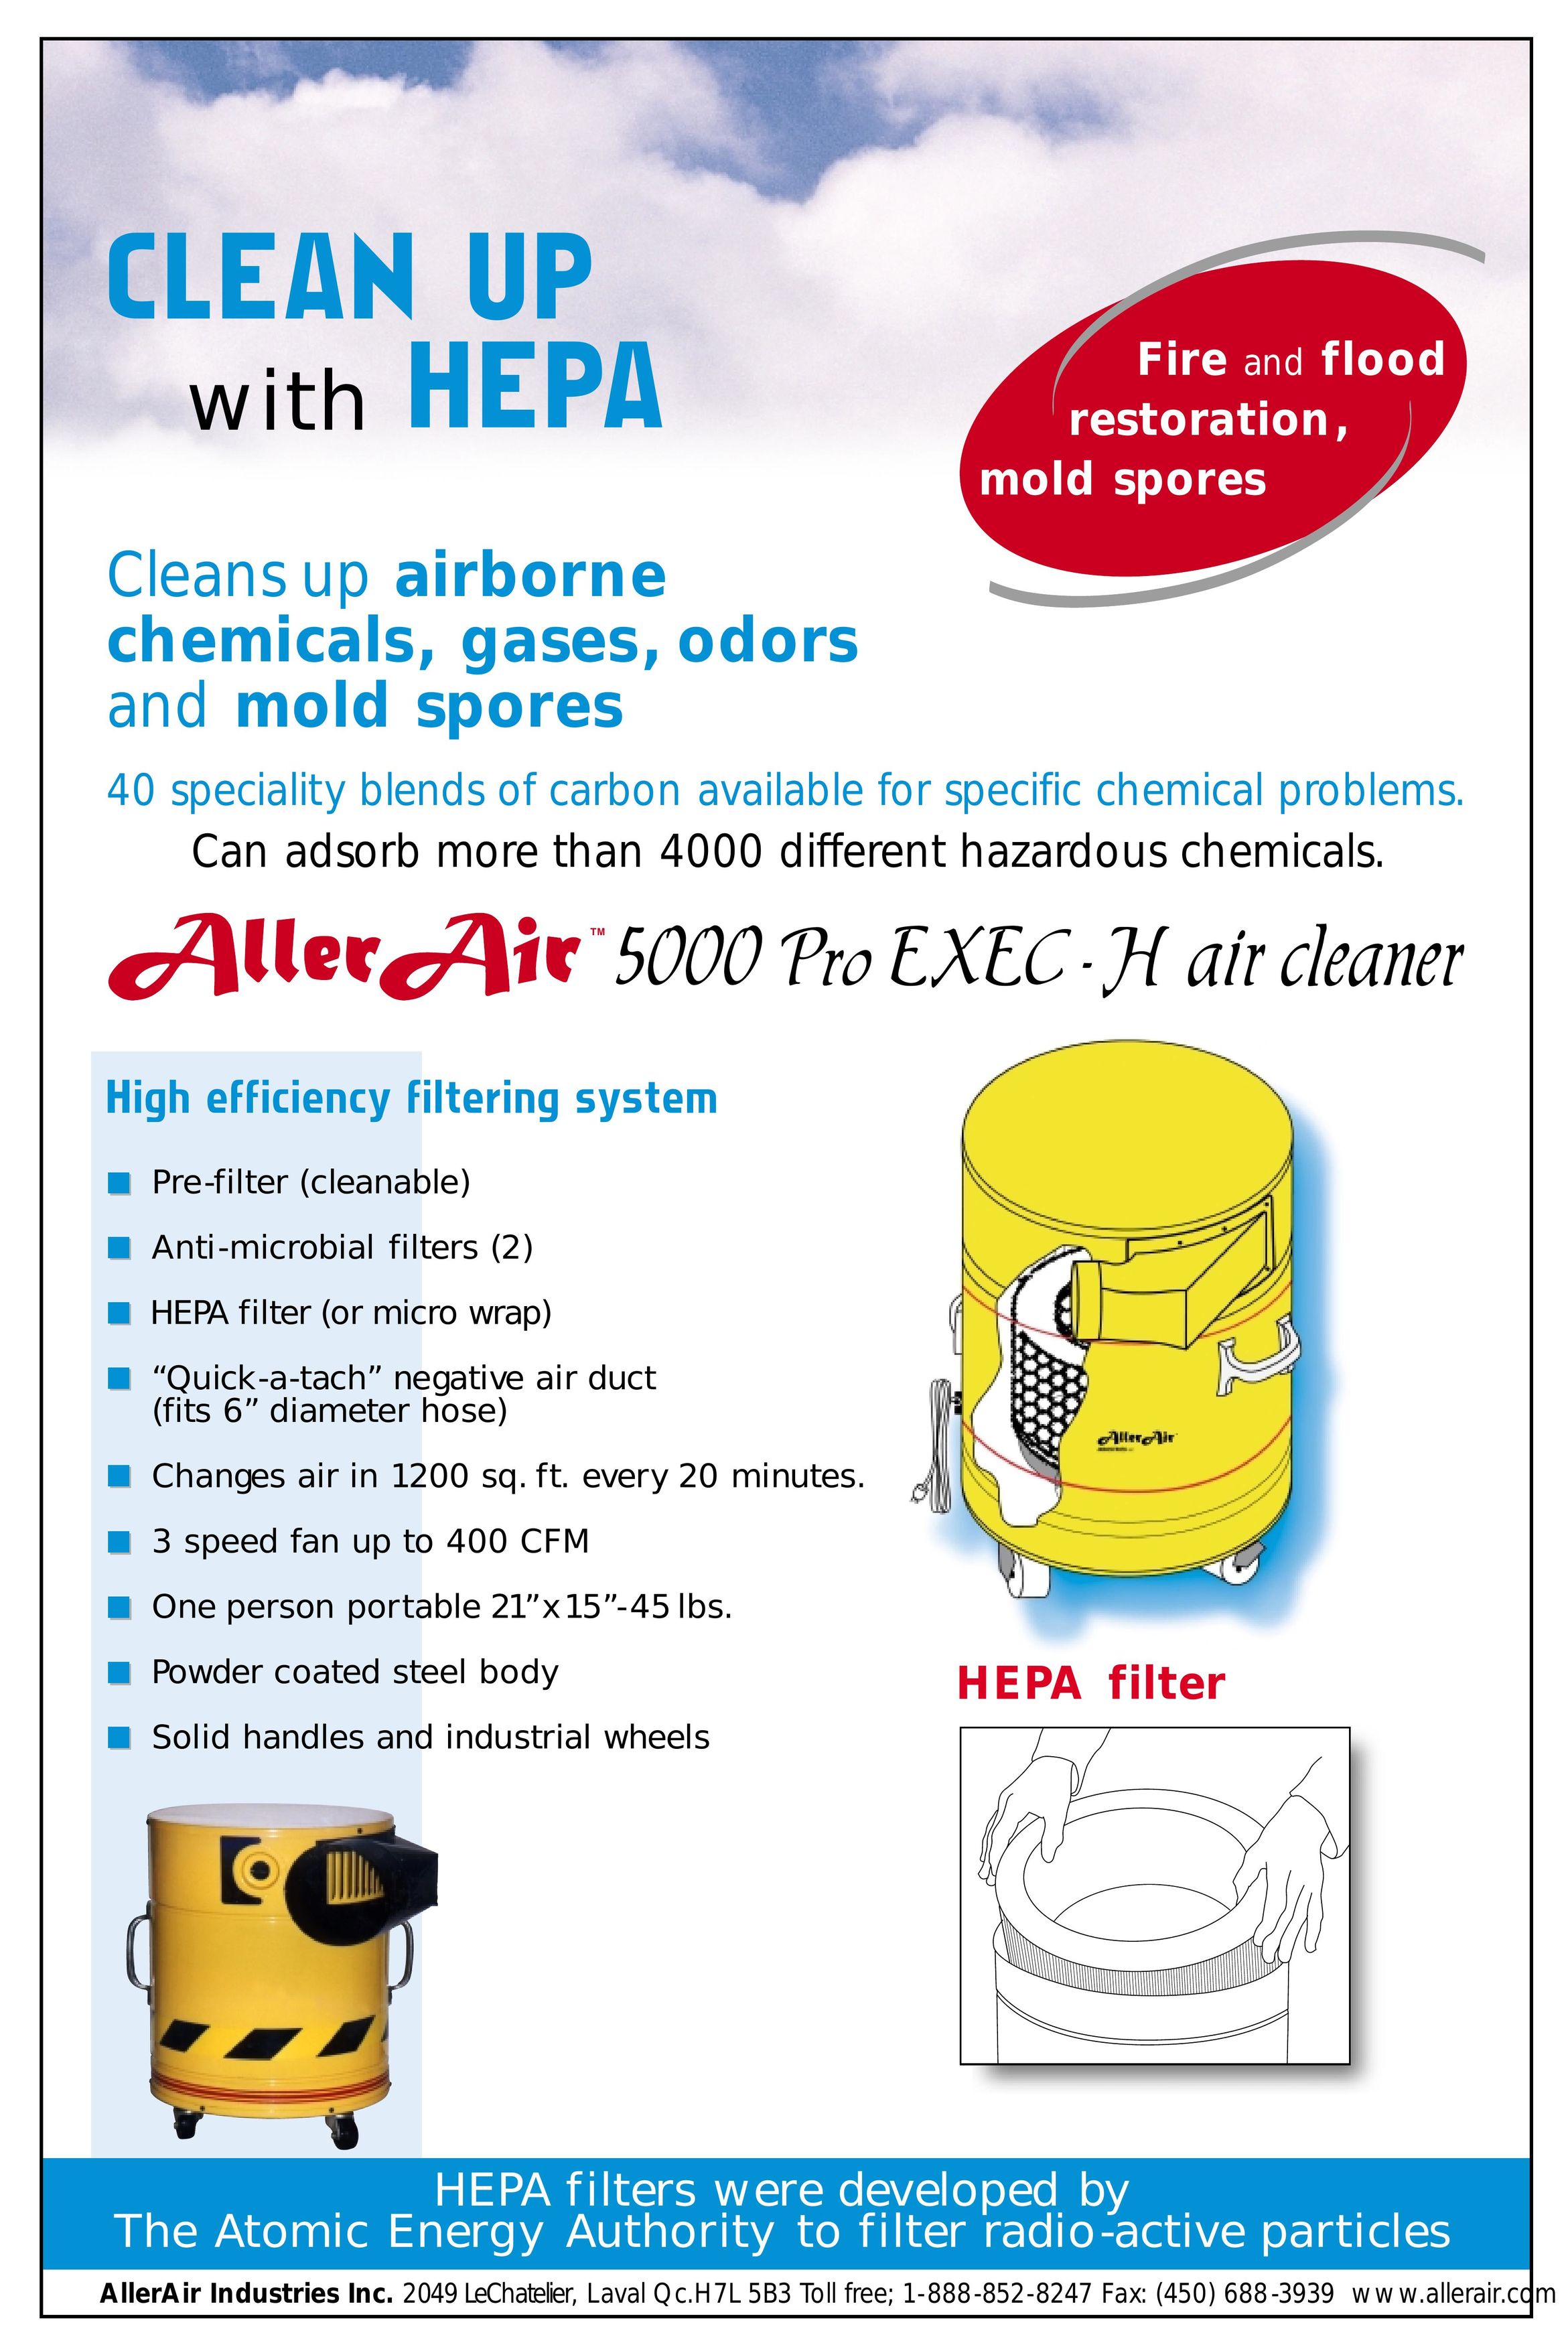 AllerAir 500 Pro Exec H Air Cleaner User Manual (Page 1)